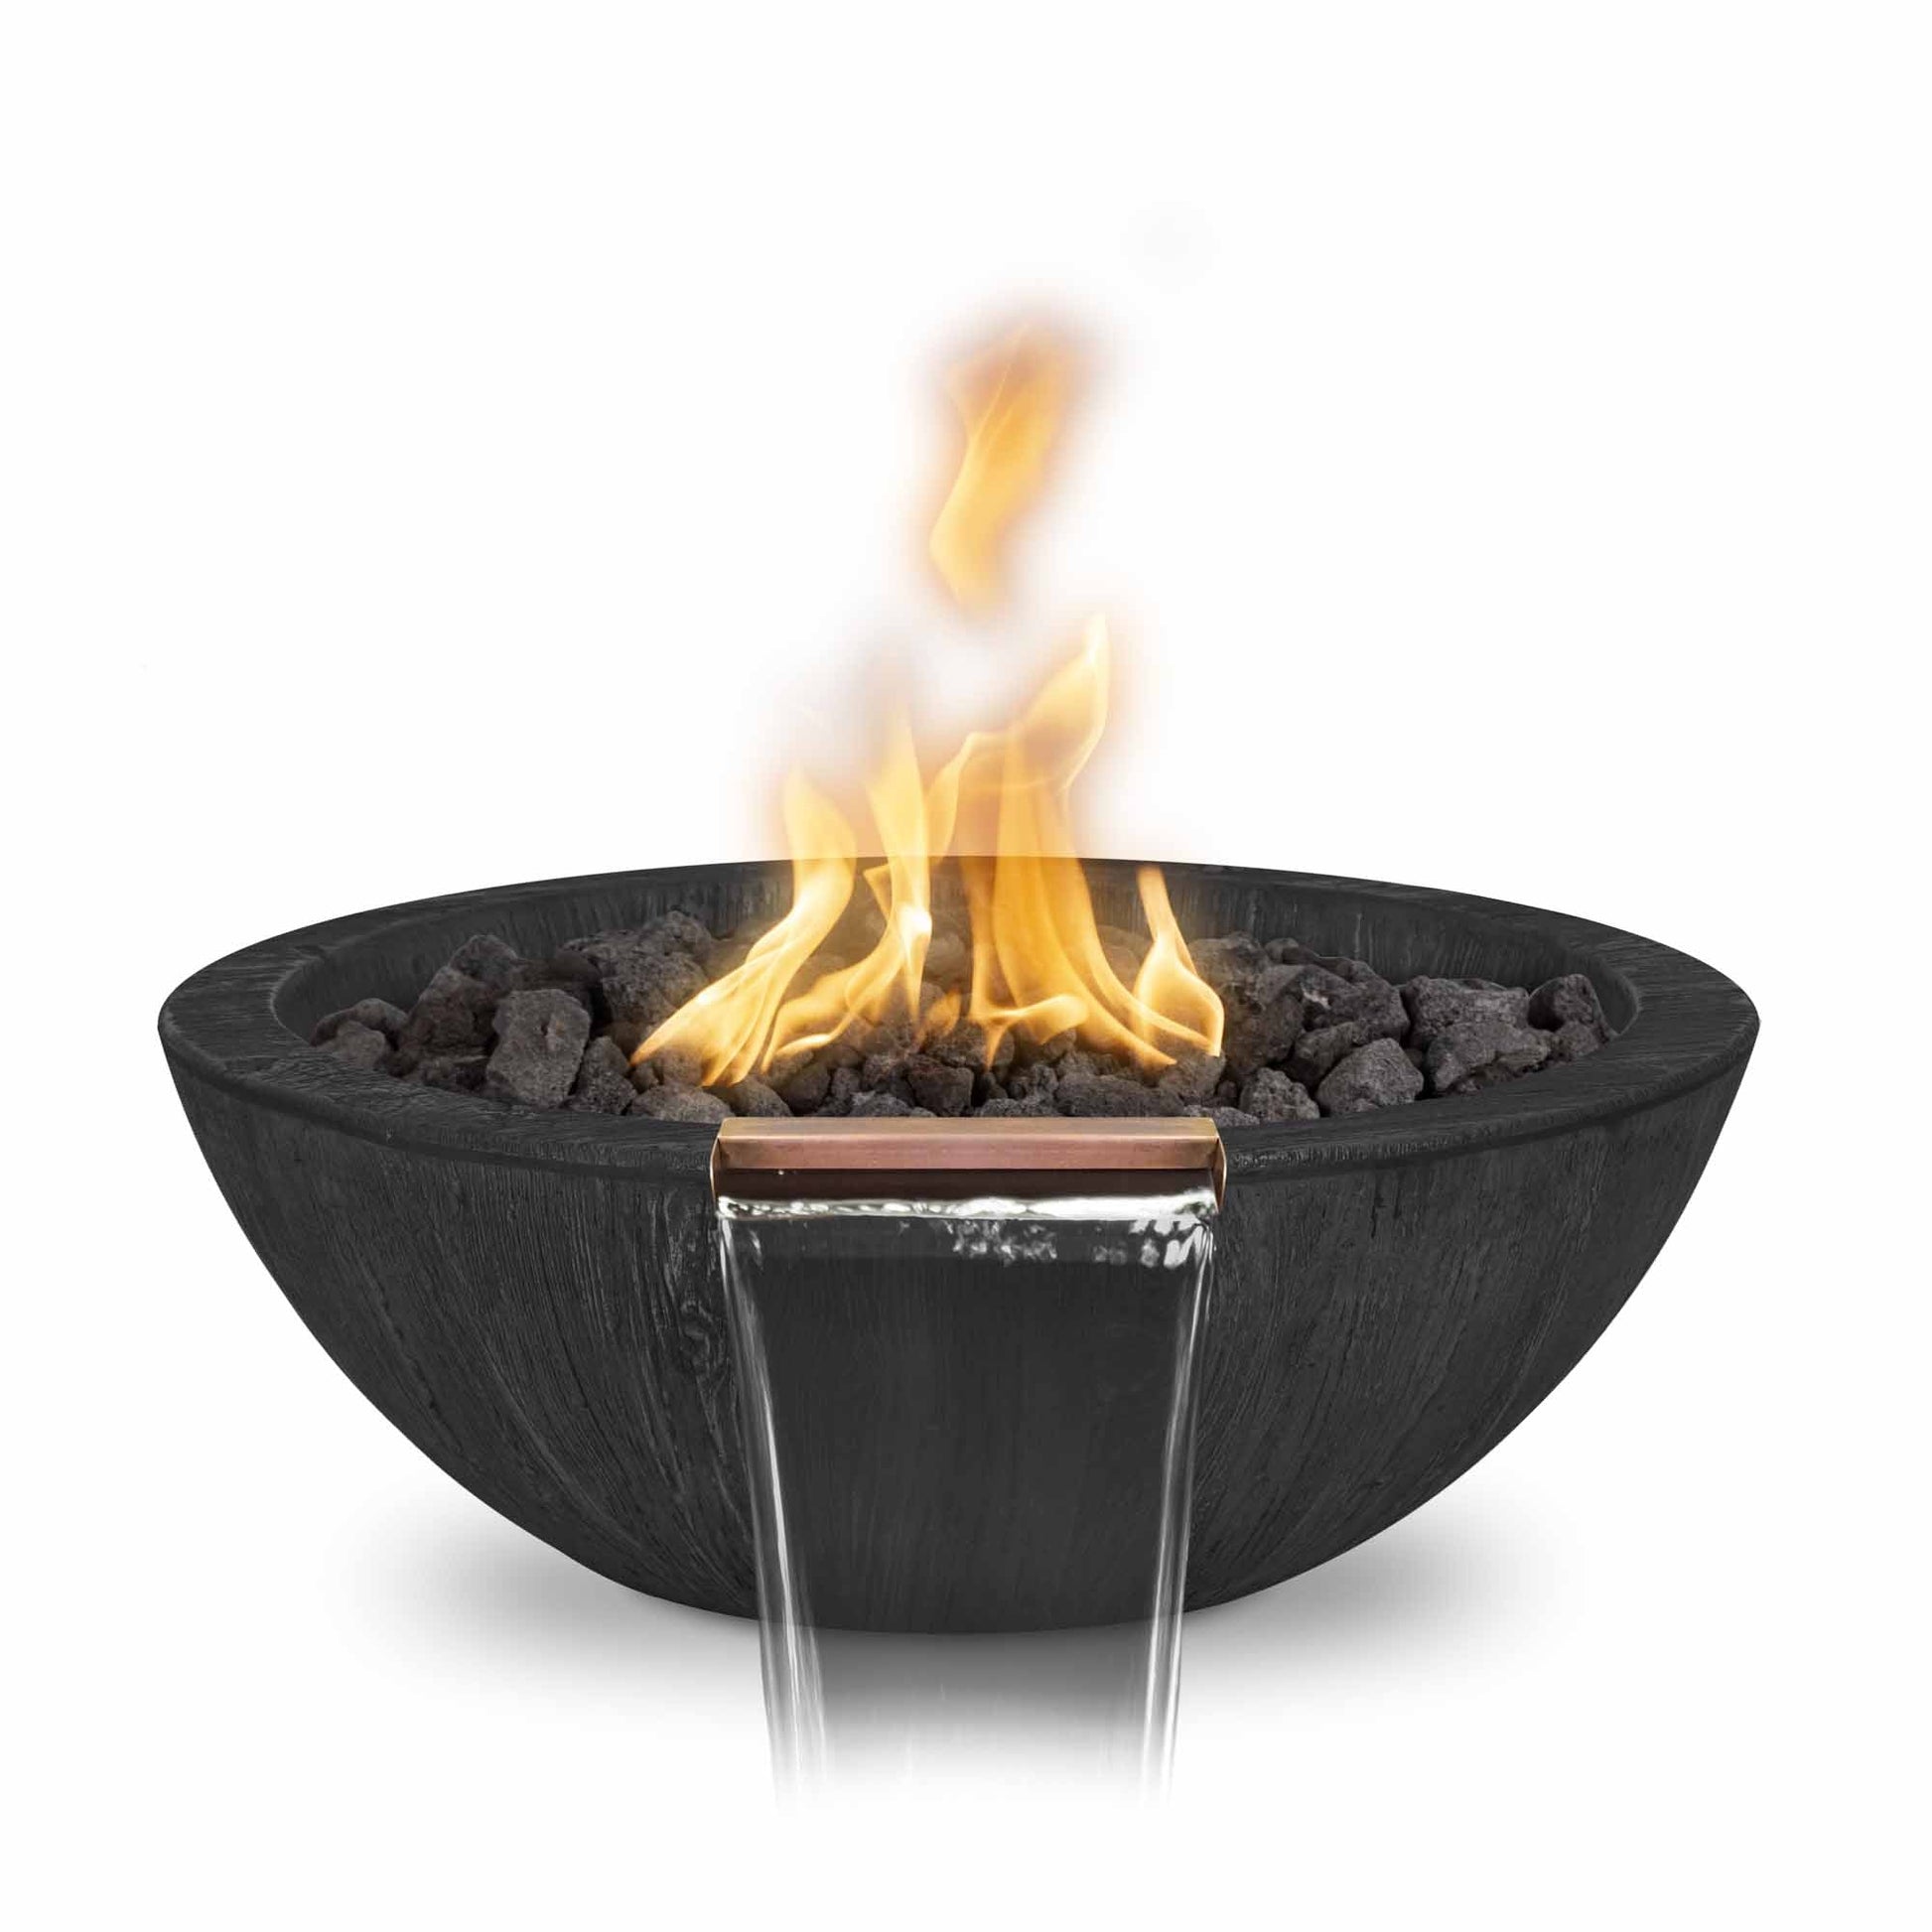 The Outdoor Plus Round Sedona 27" Ebony Wood Grain Natural Gas Fire & Water Bowl with Match Lit with Flame Sense Ignition